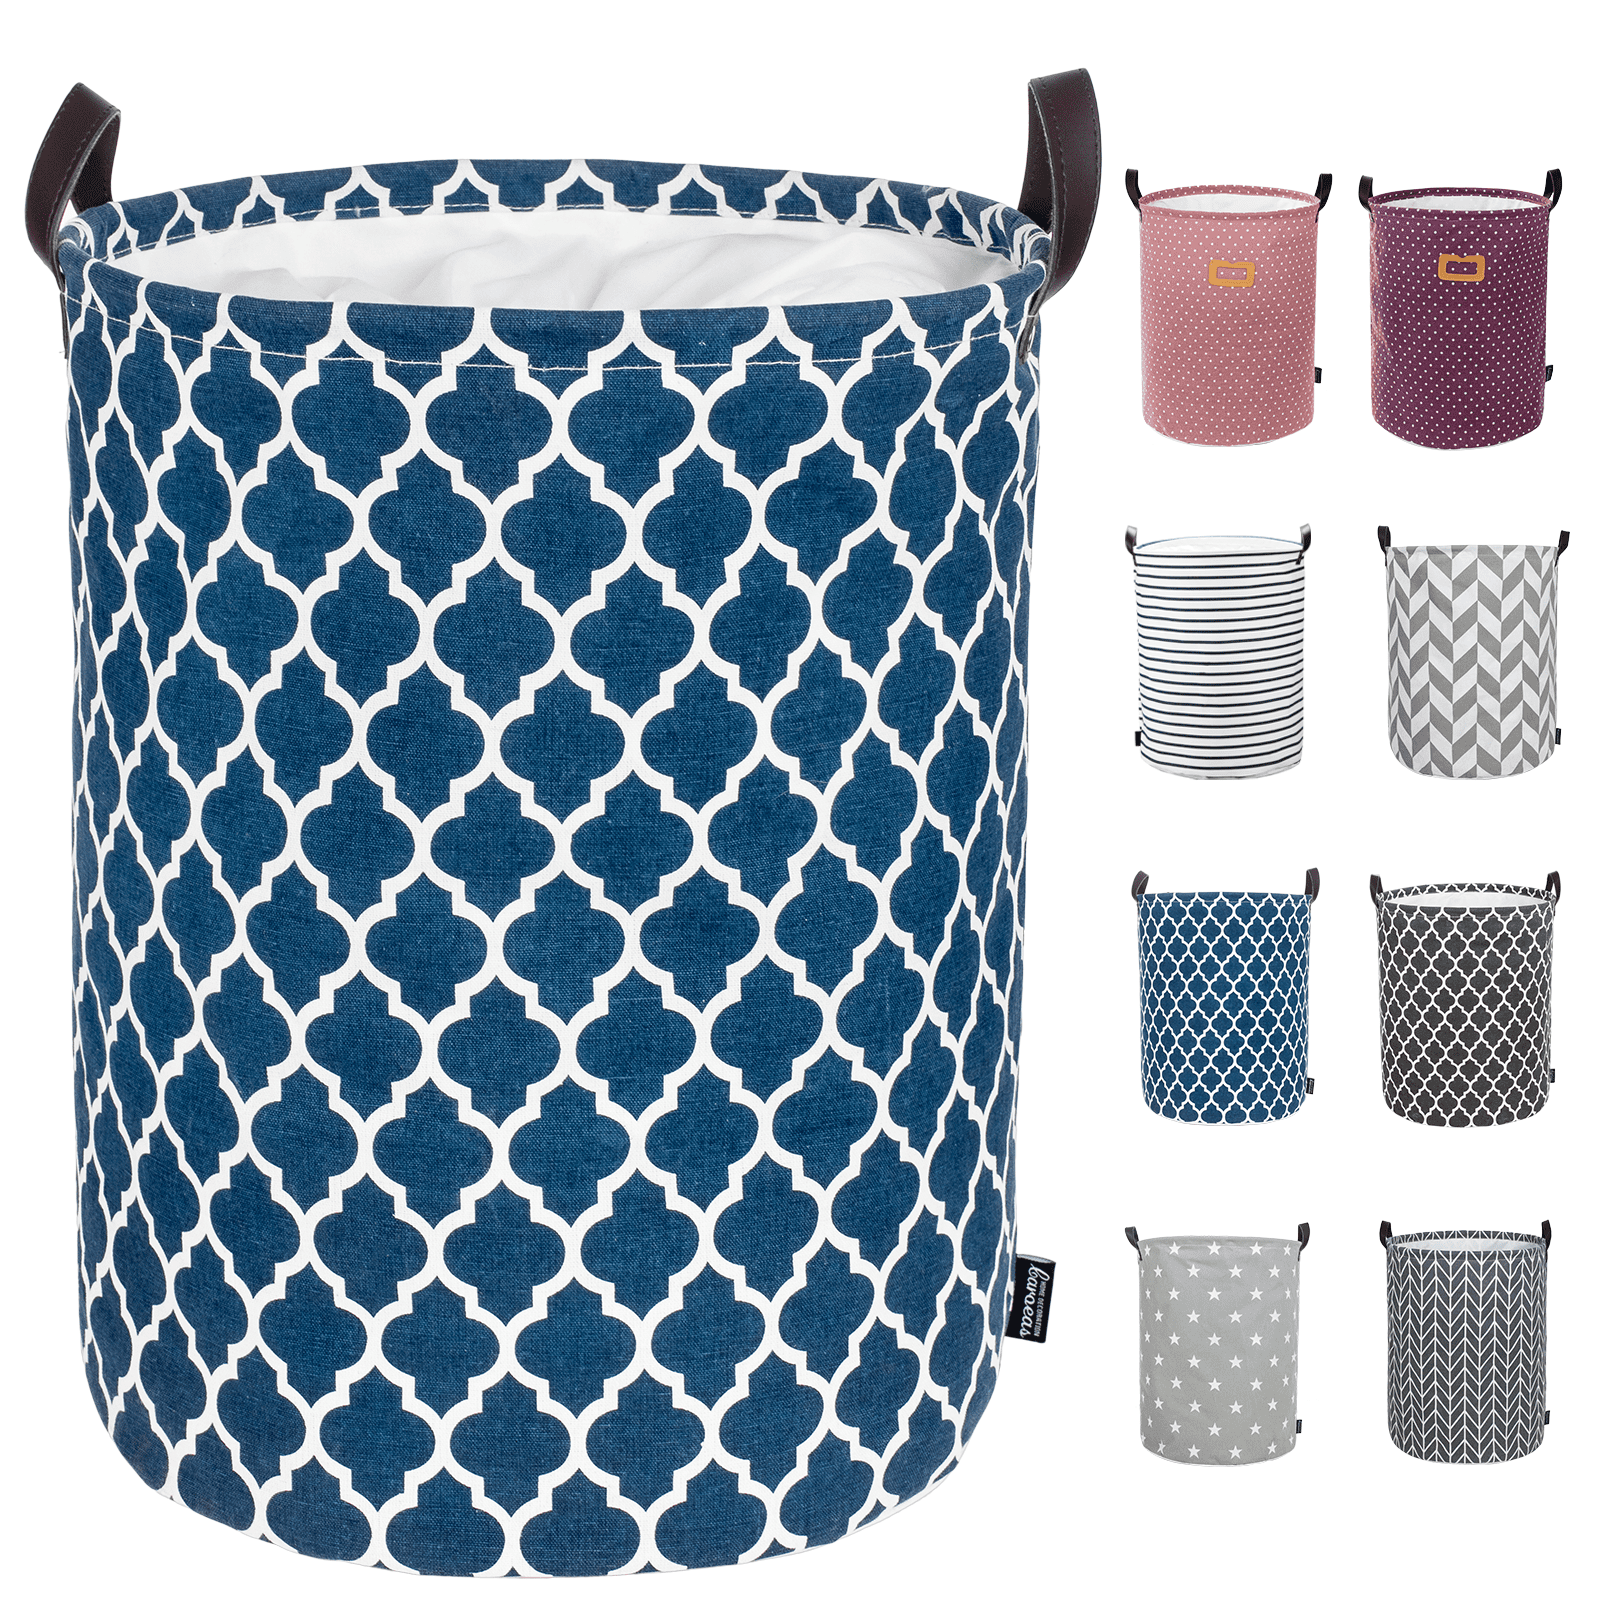 Voss Cotton/Linen Canvas Foldable Opening Medium Fabric Laundry Basket Holding and Arranging Laundry Bucket 35*45CM Door Hampers for Laundry Collapsible